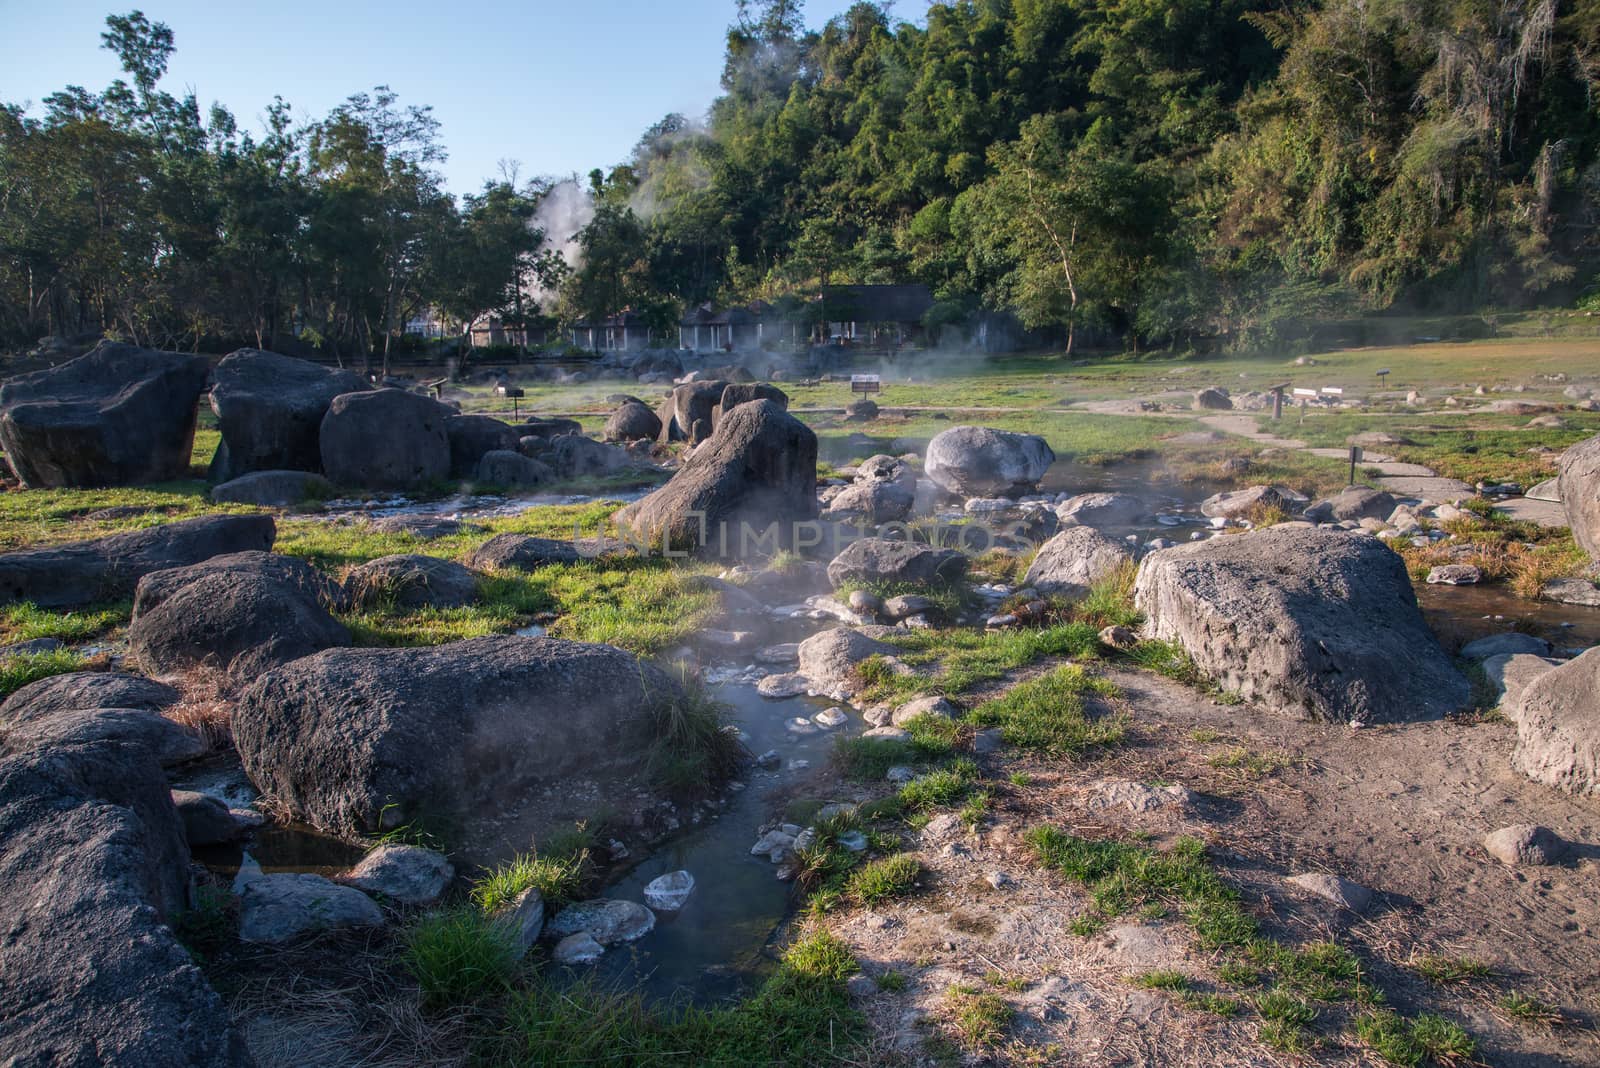 Fang Hot Spring National Park is part of Doi Pha Hom Pok National Park in Chiang Mai, Thailand